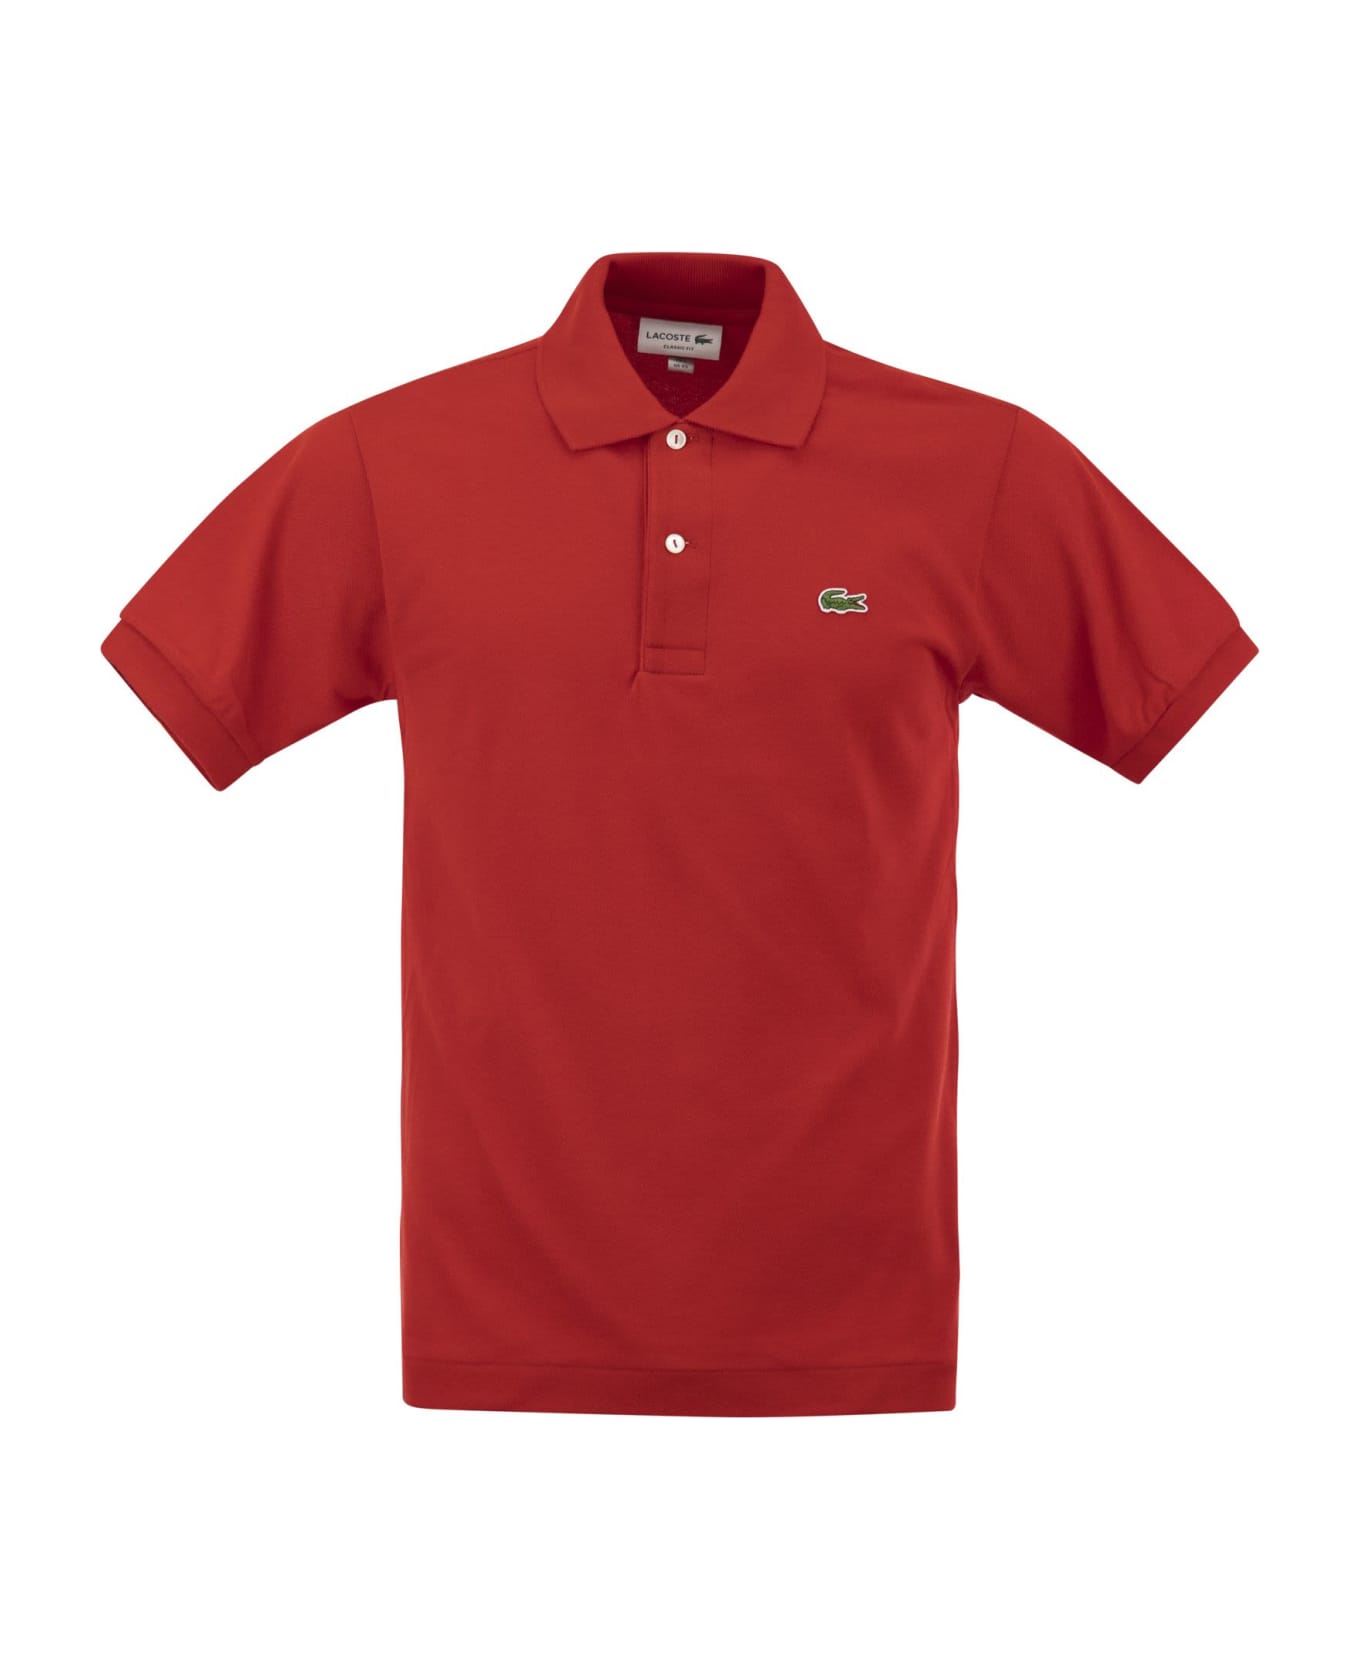 Lacoste Classic Fit Cotton Pique Polo Shirt - Red